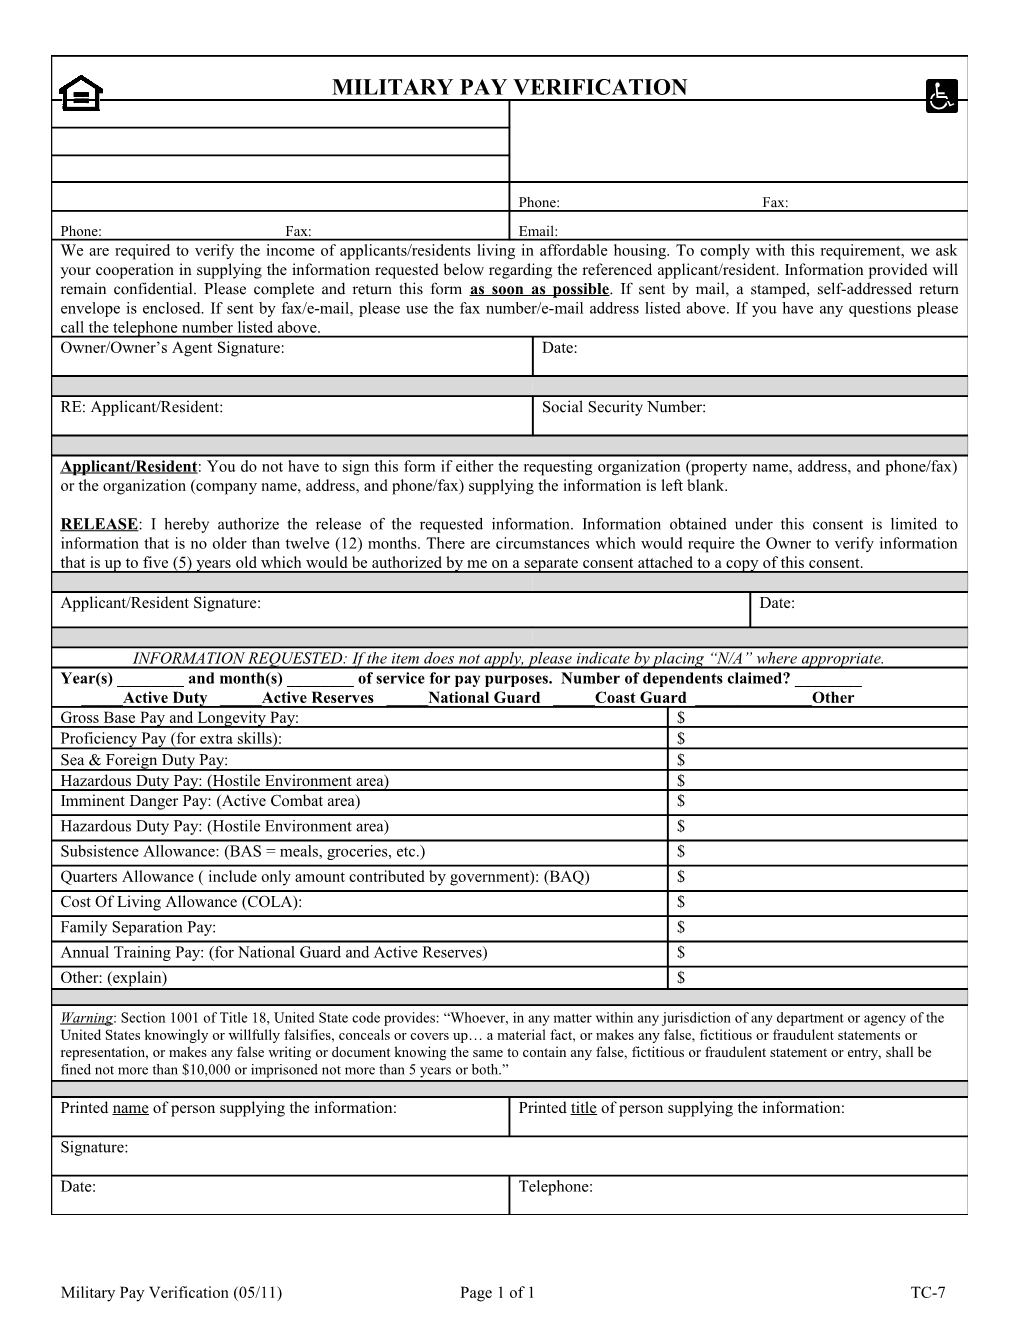 Military Pay Verification (05/11) Page 1 of 1TC-7